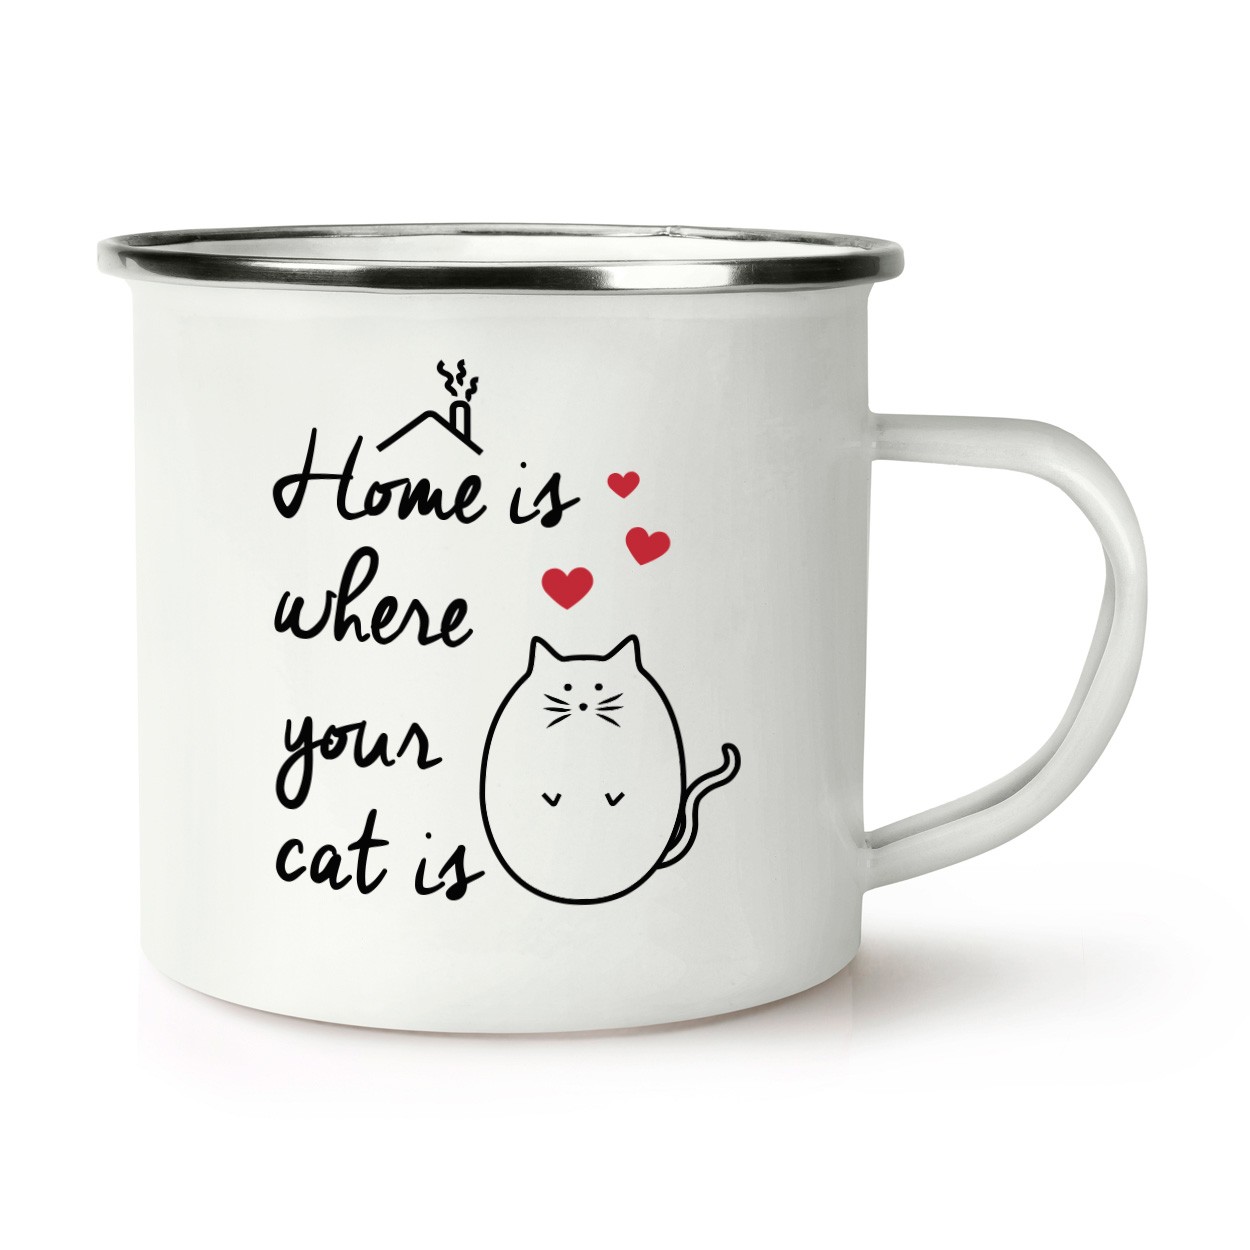 Home Is Where Your Cat Is Retro Enamel Mug Cup